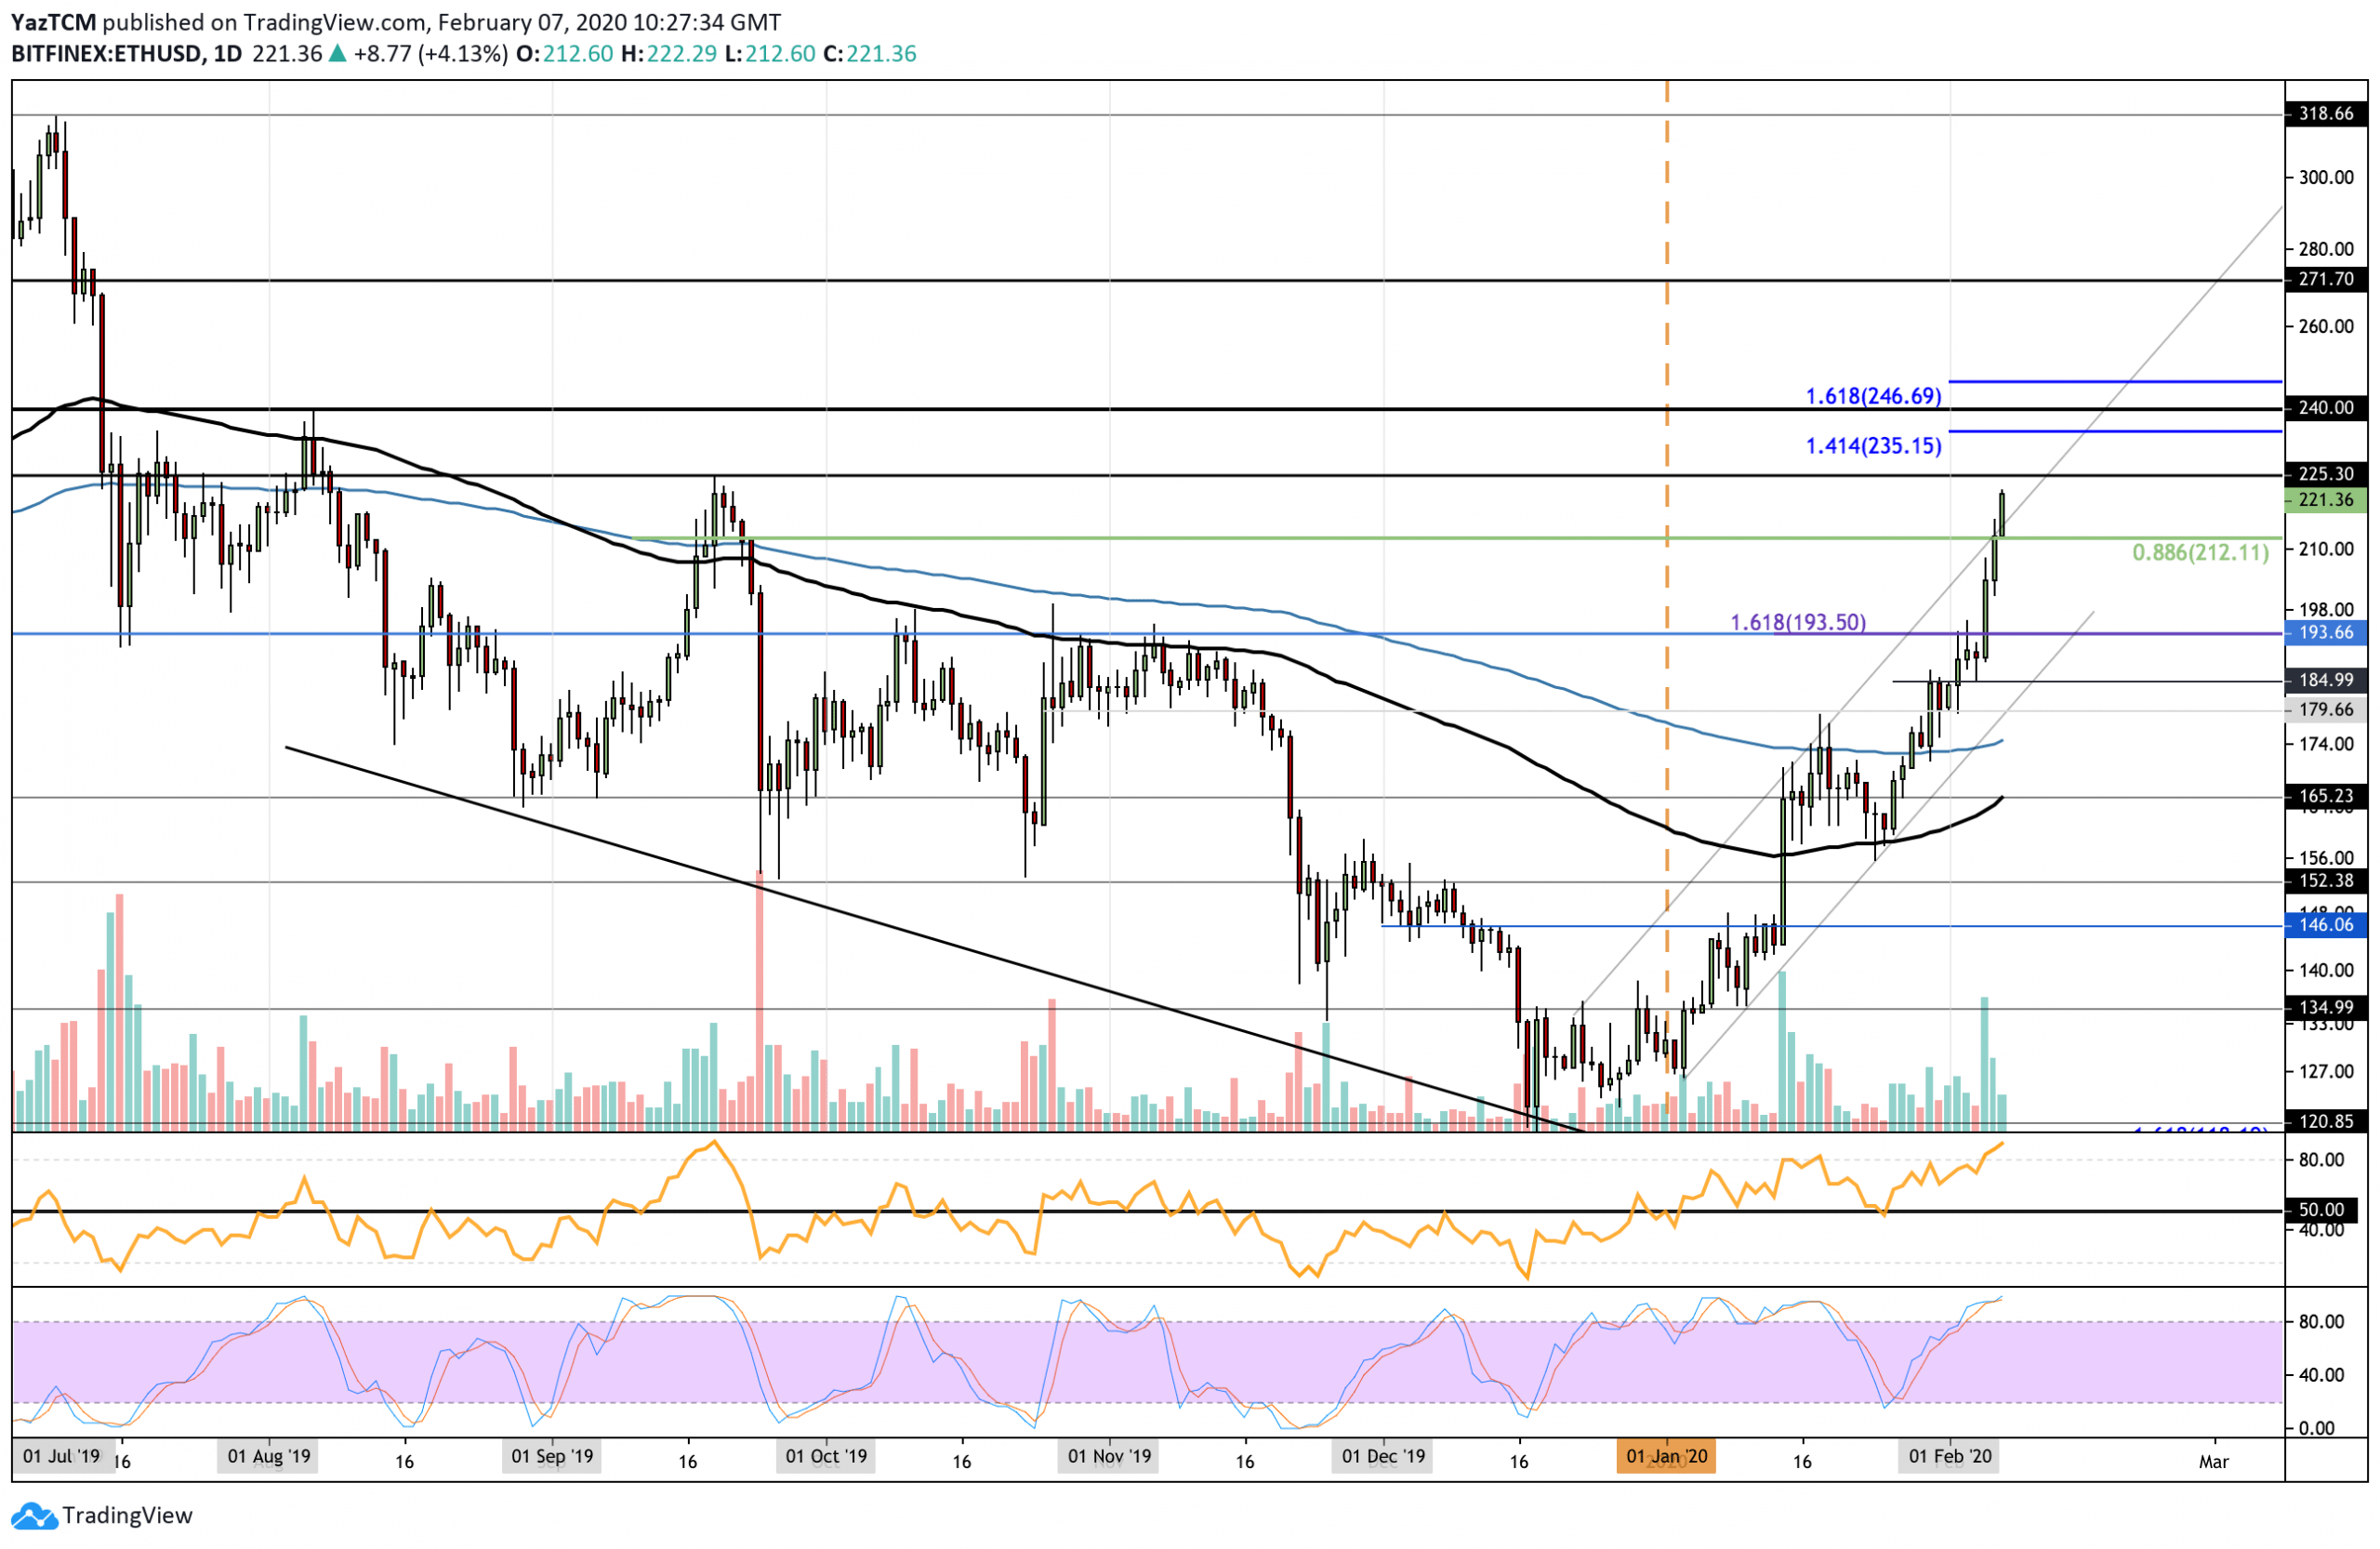 Crypto Price Analysis & Overview February 7th: Bitcoin, Ethereum, Ripple, Tron, and Chainlink.